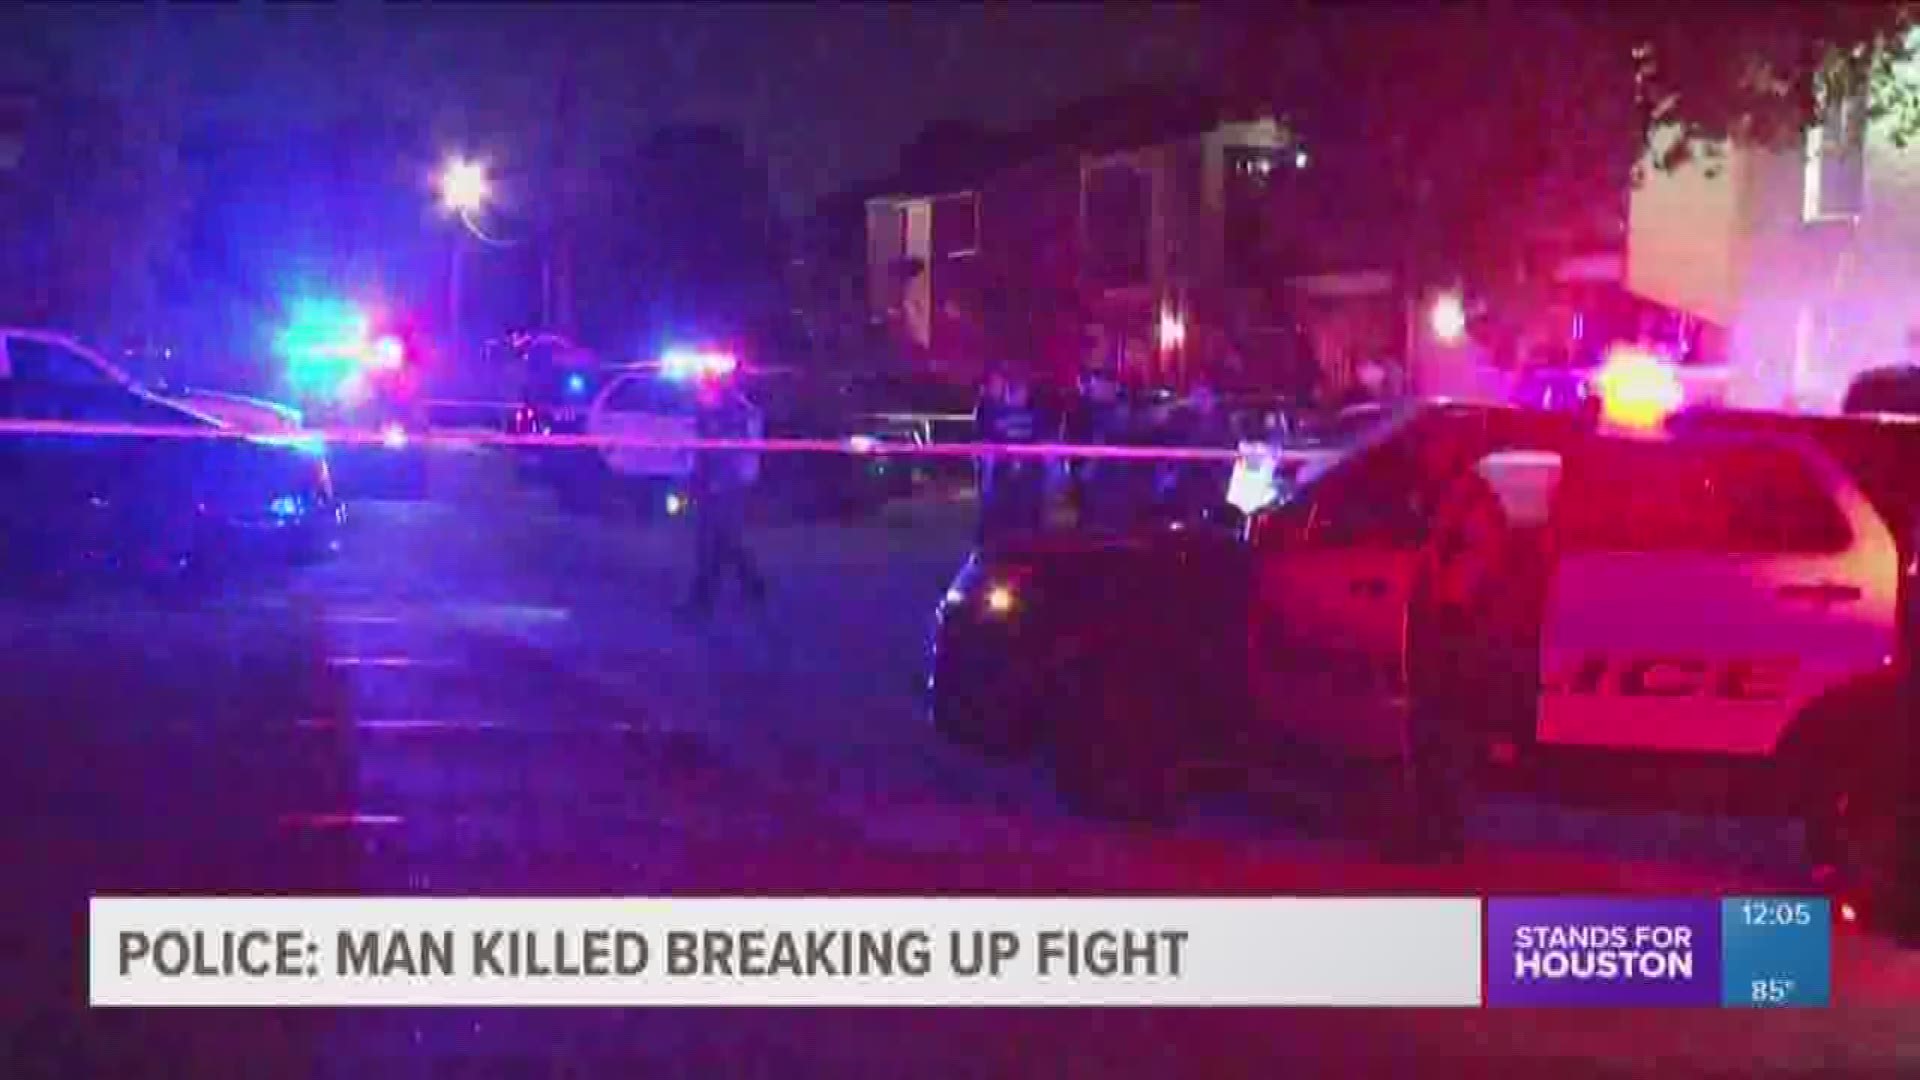 Police say a man died trying to break up a fight outside his southwest Houston apartment overnight.